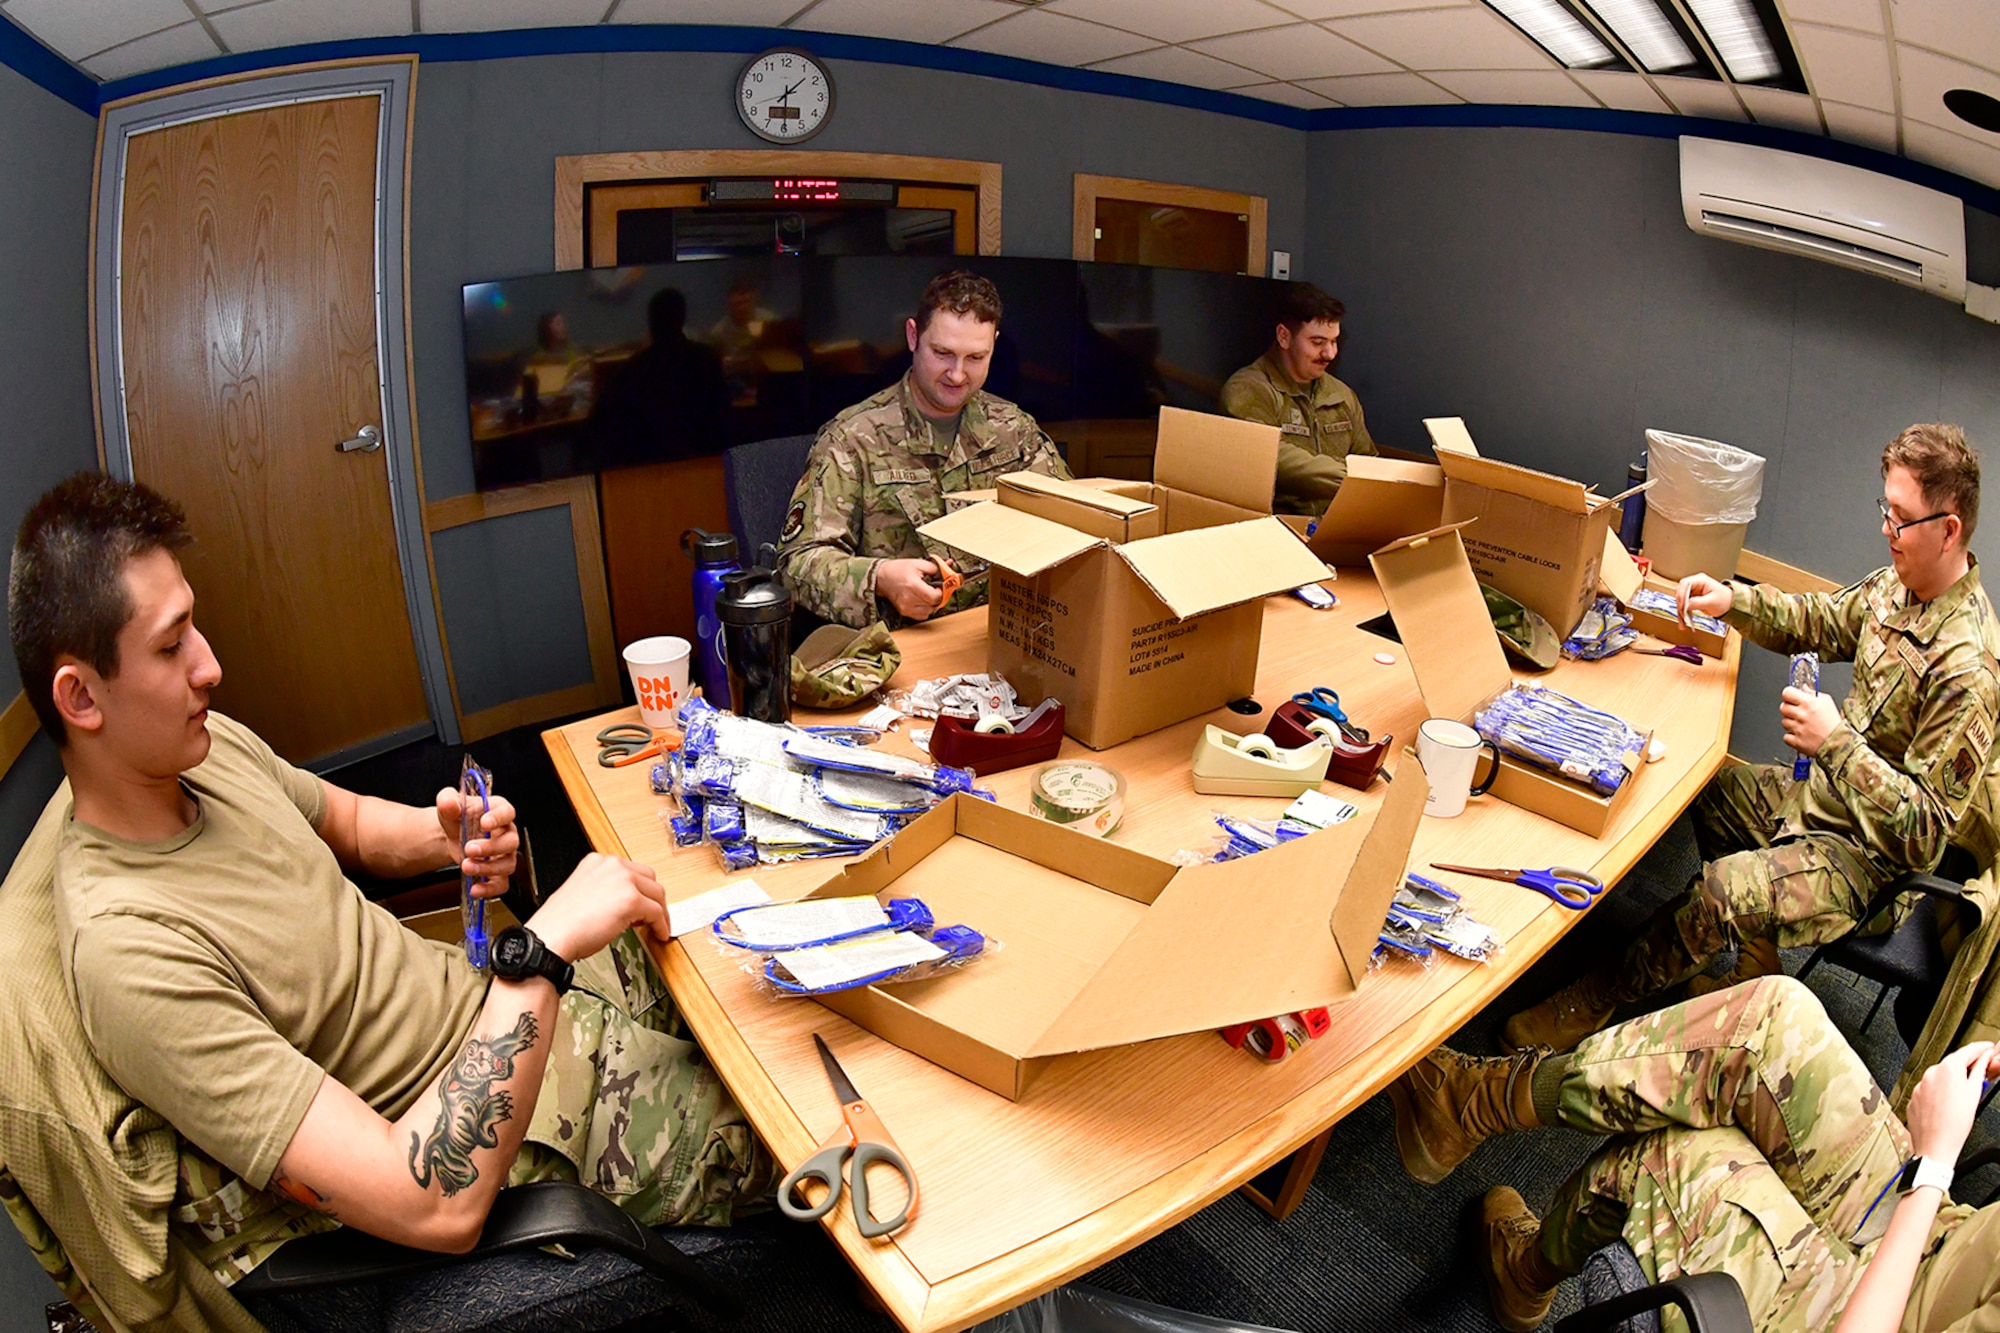 Volunteer Airmen from the 388th Fighter Wing prepare suicide prevention cable locks for distribution Feb. 7, 2023, at Hill Air Force Base, Utah. These locks were provided by the Headquarters Air Force Suicide Prevention Program and are known as a time-based prevention tool, designed to delay access to firearms and medicine, for those contemplating suicide during an emotionally charged moment. (U.S. Air Force photo by Todd Cromar)